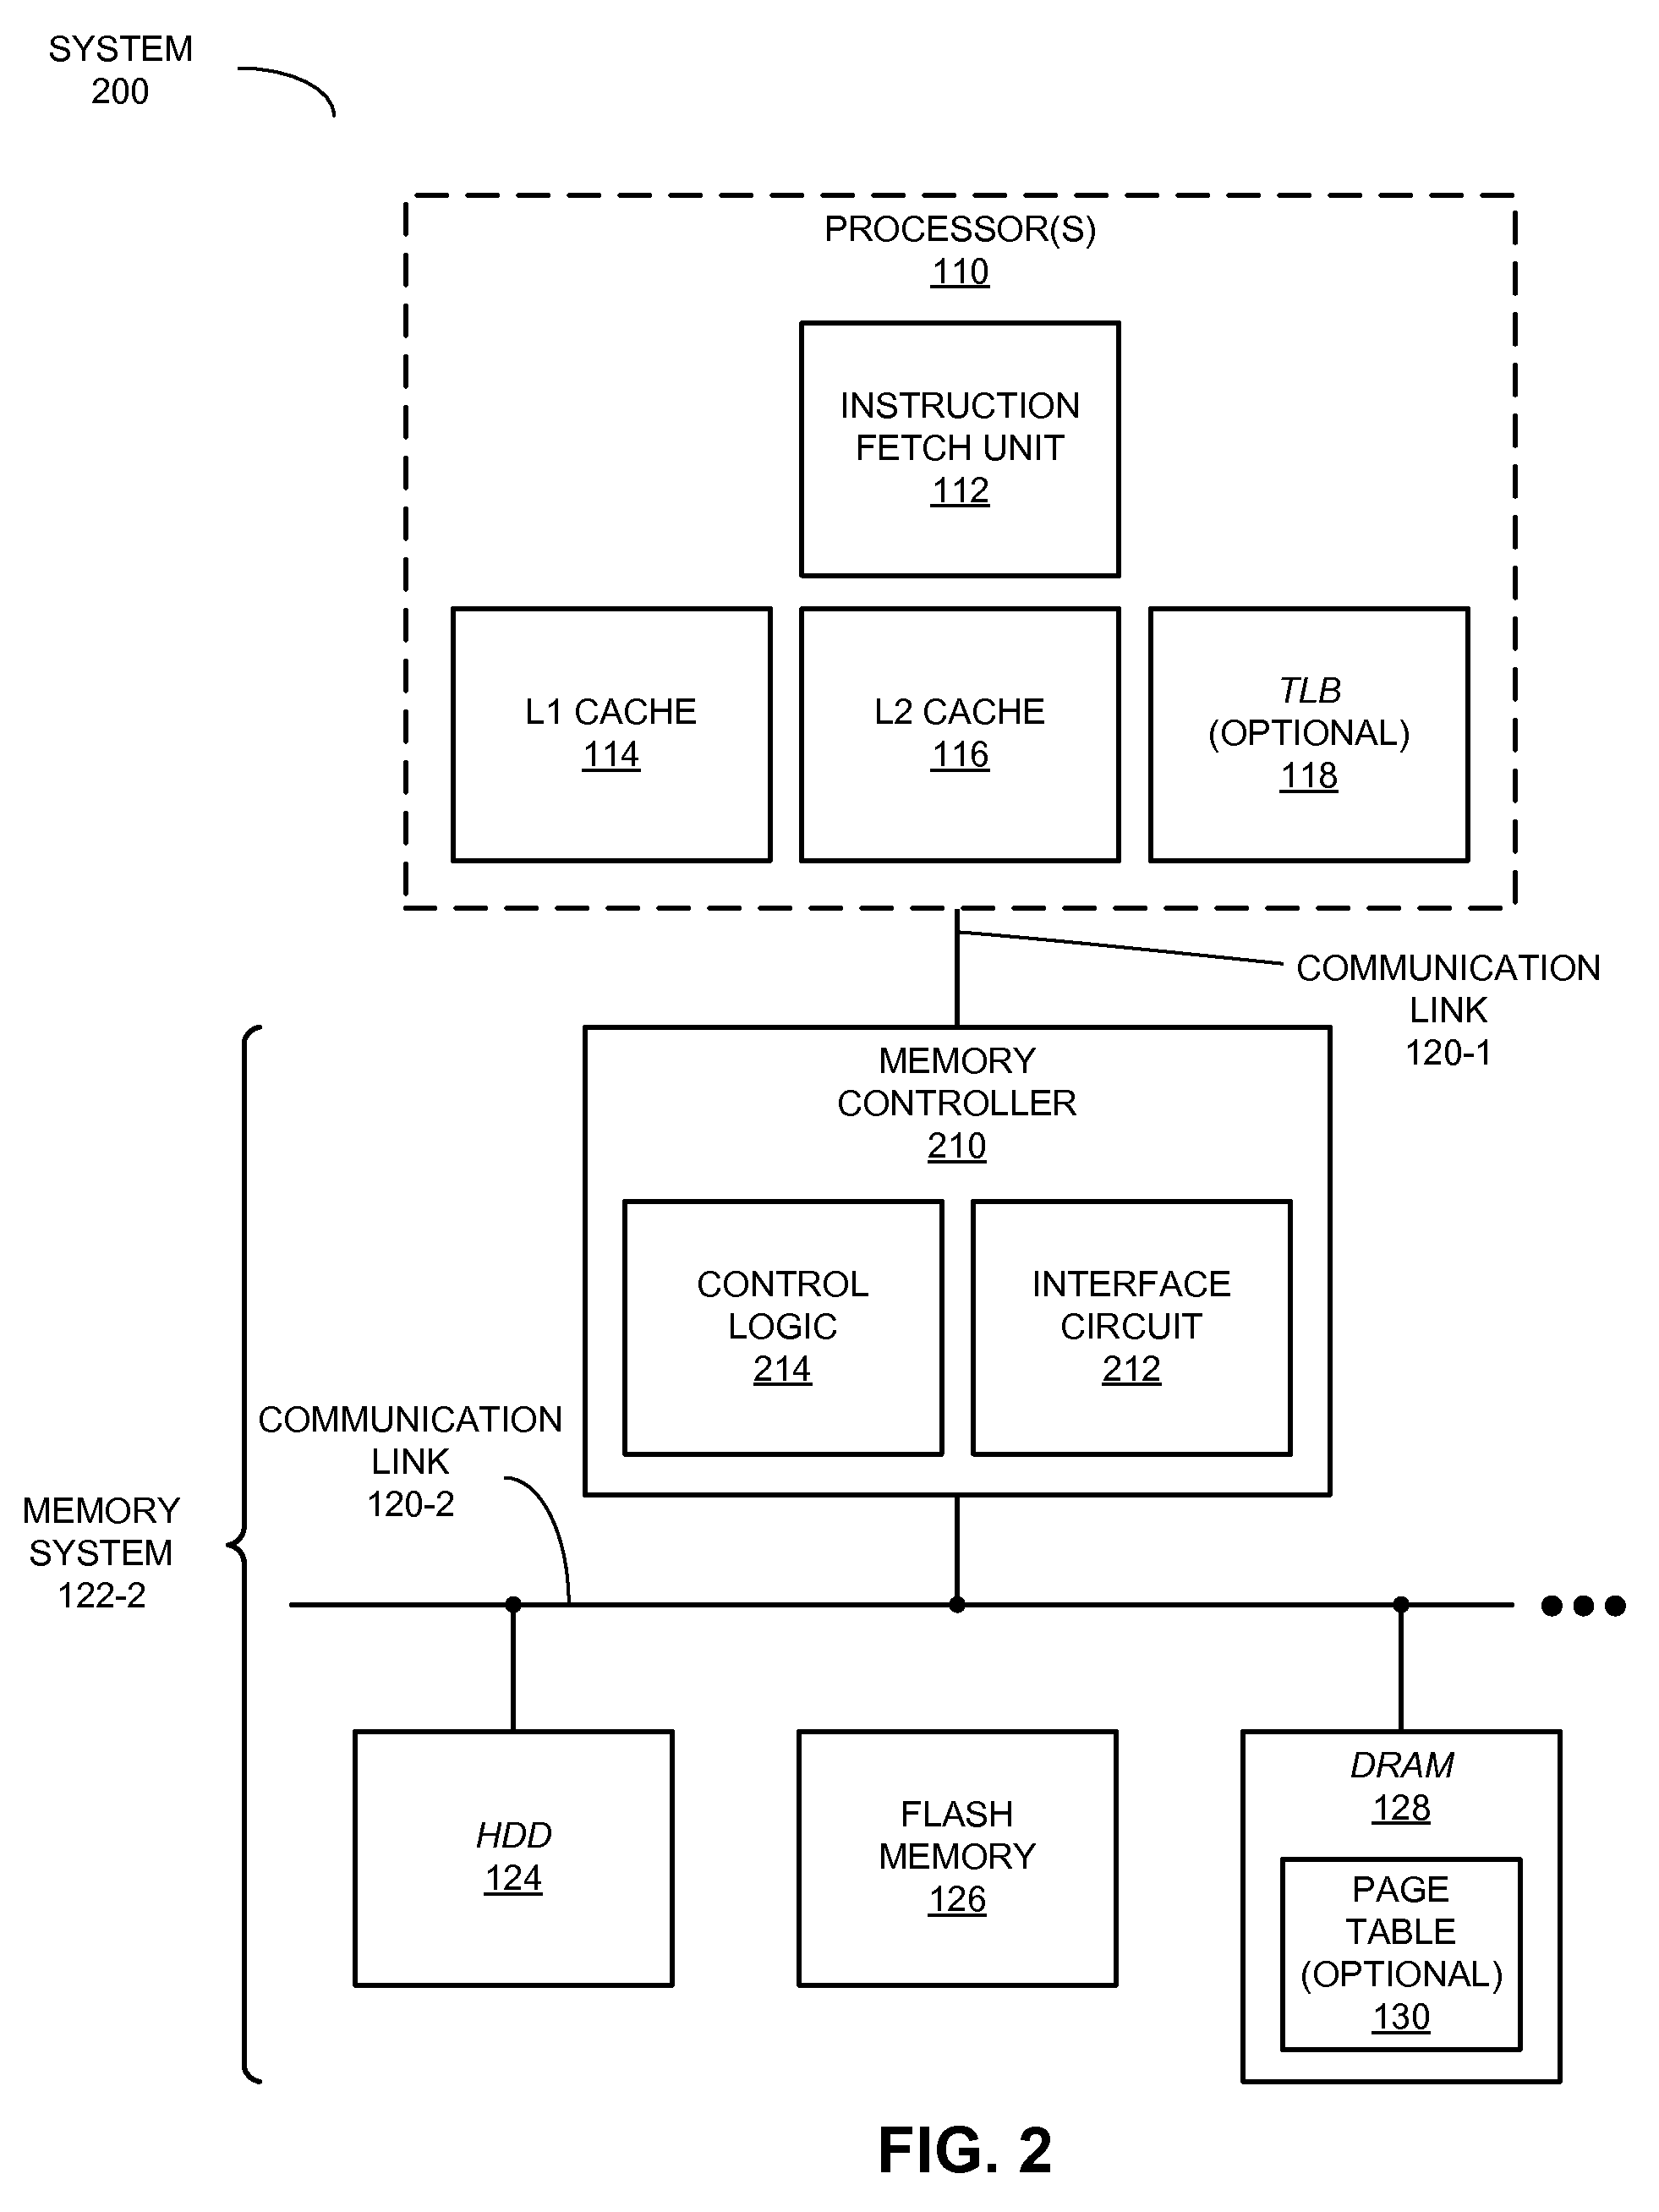 Disposition instructions for extended access commands